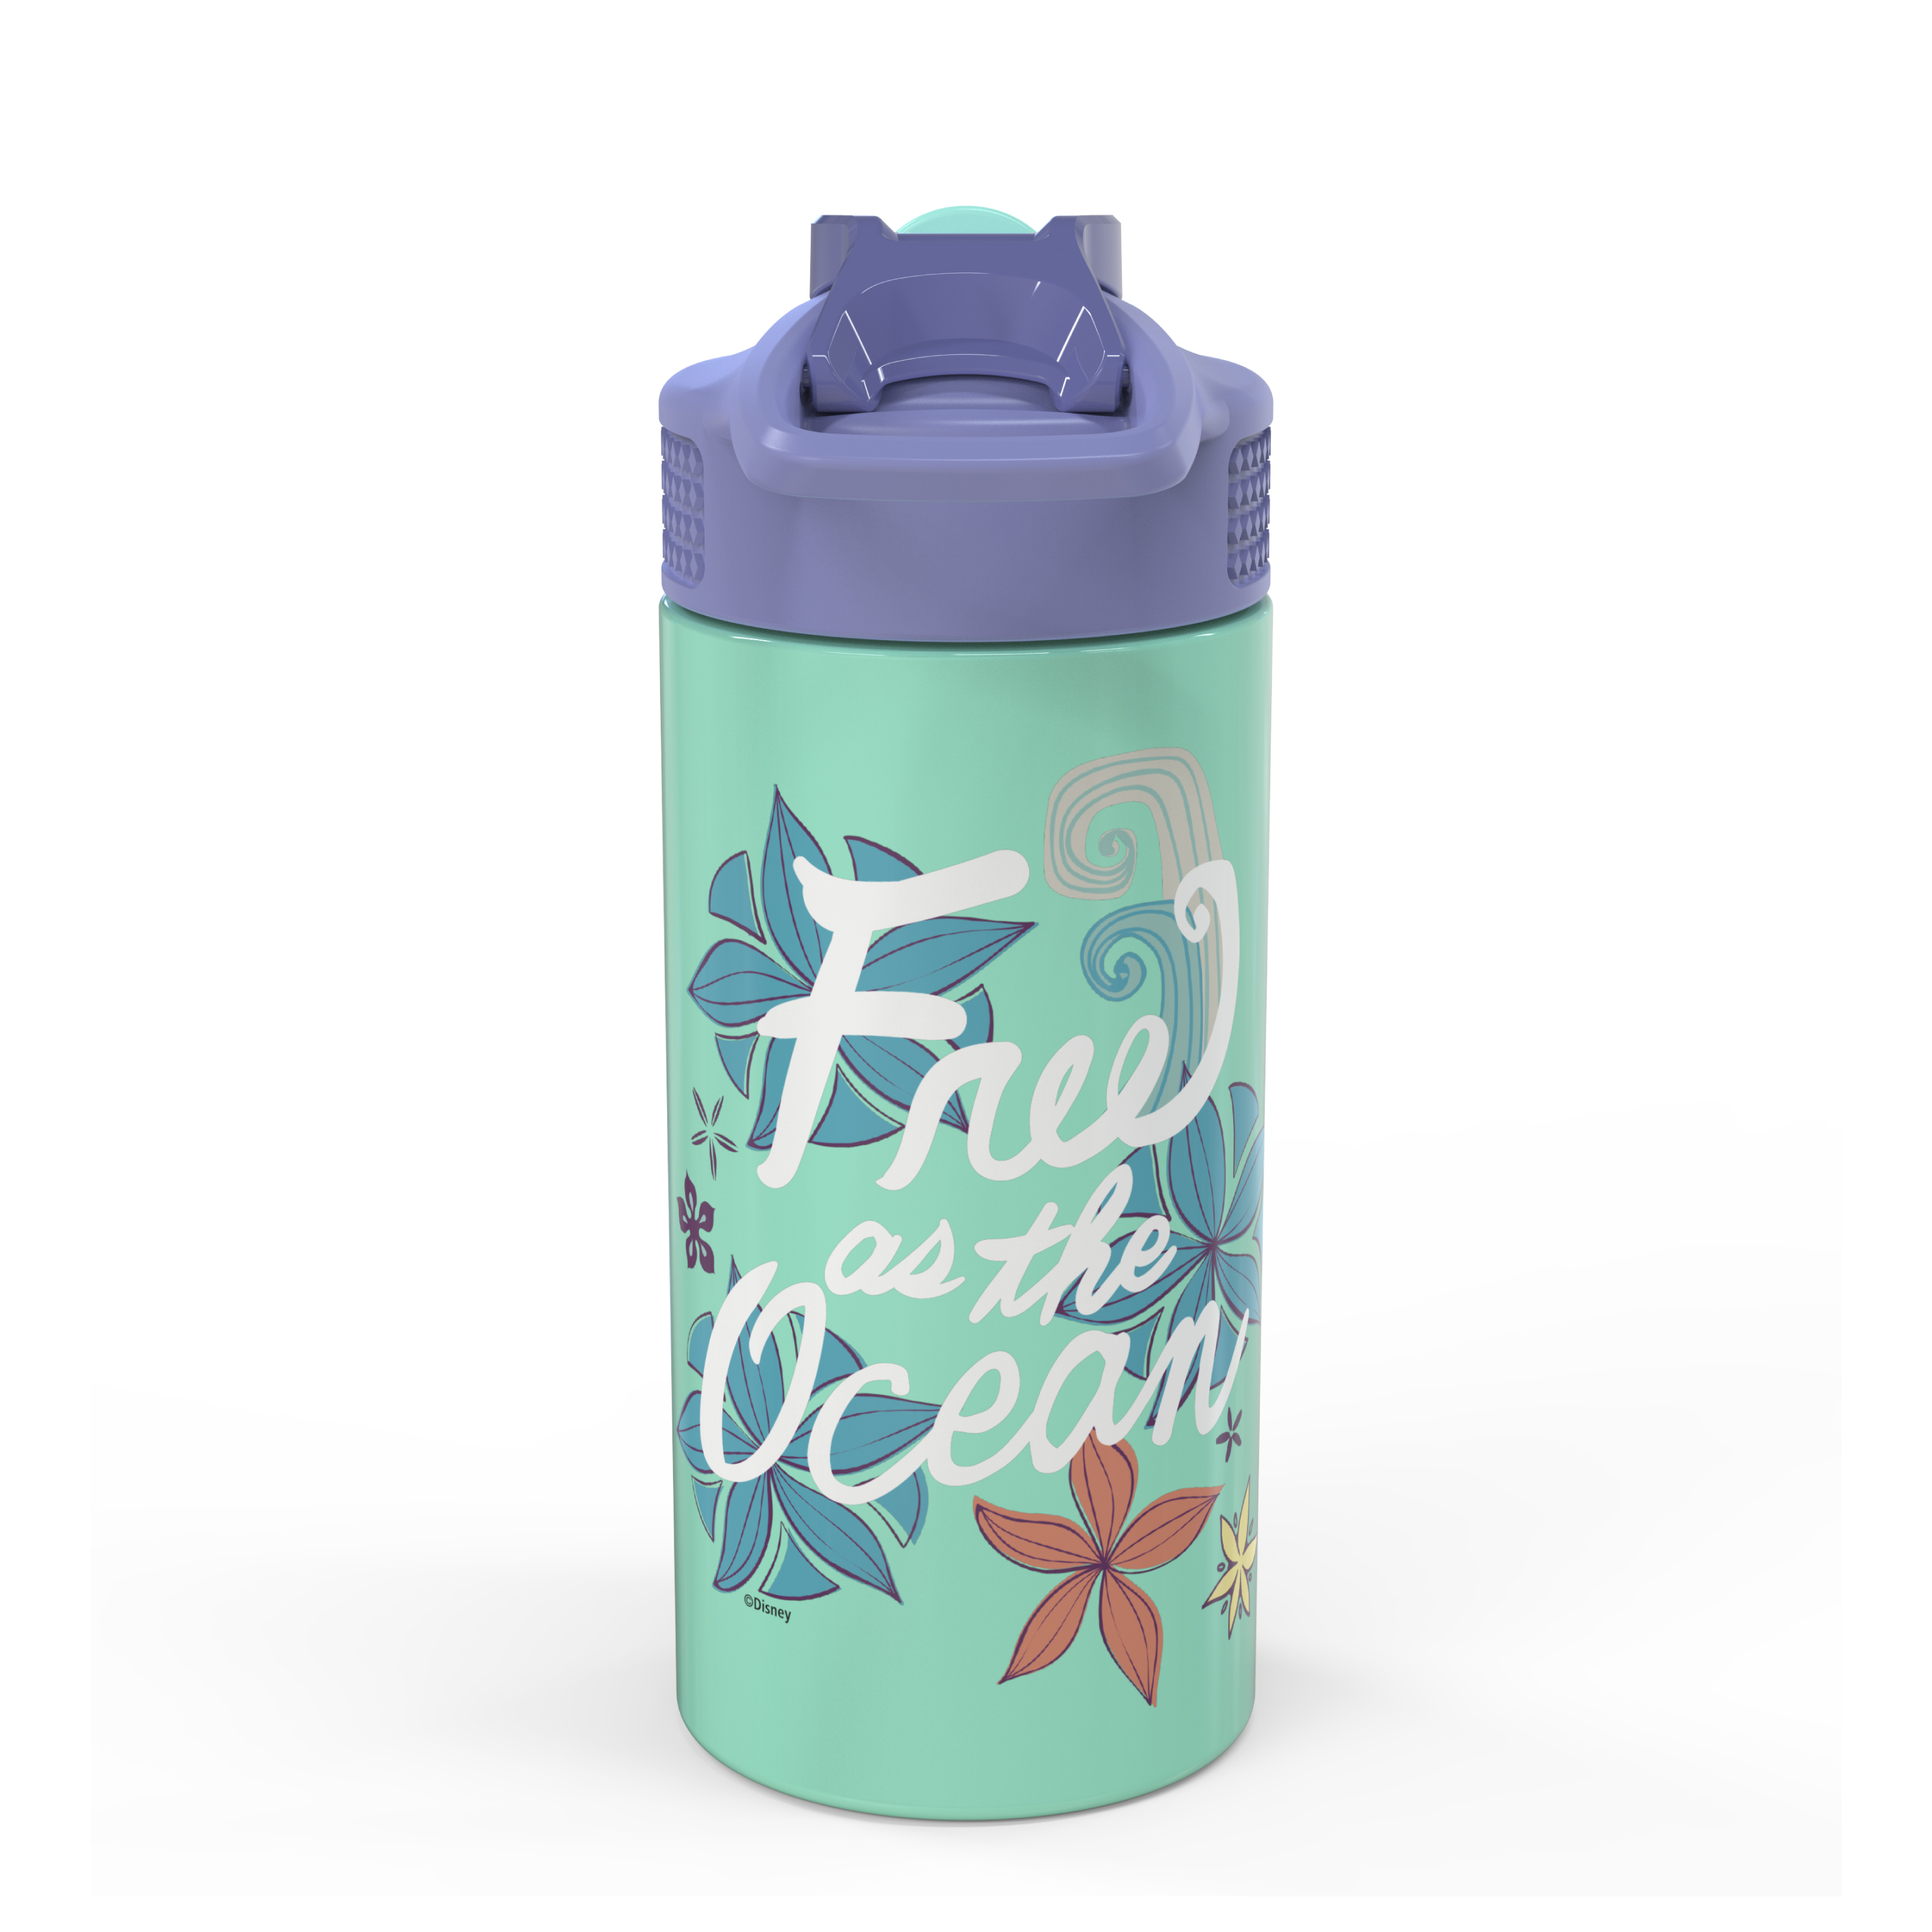 Disney 14 ounce Stainless Steel Vacuum Insulated Water Bottle, Moana slideshow image 5